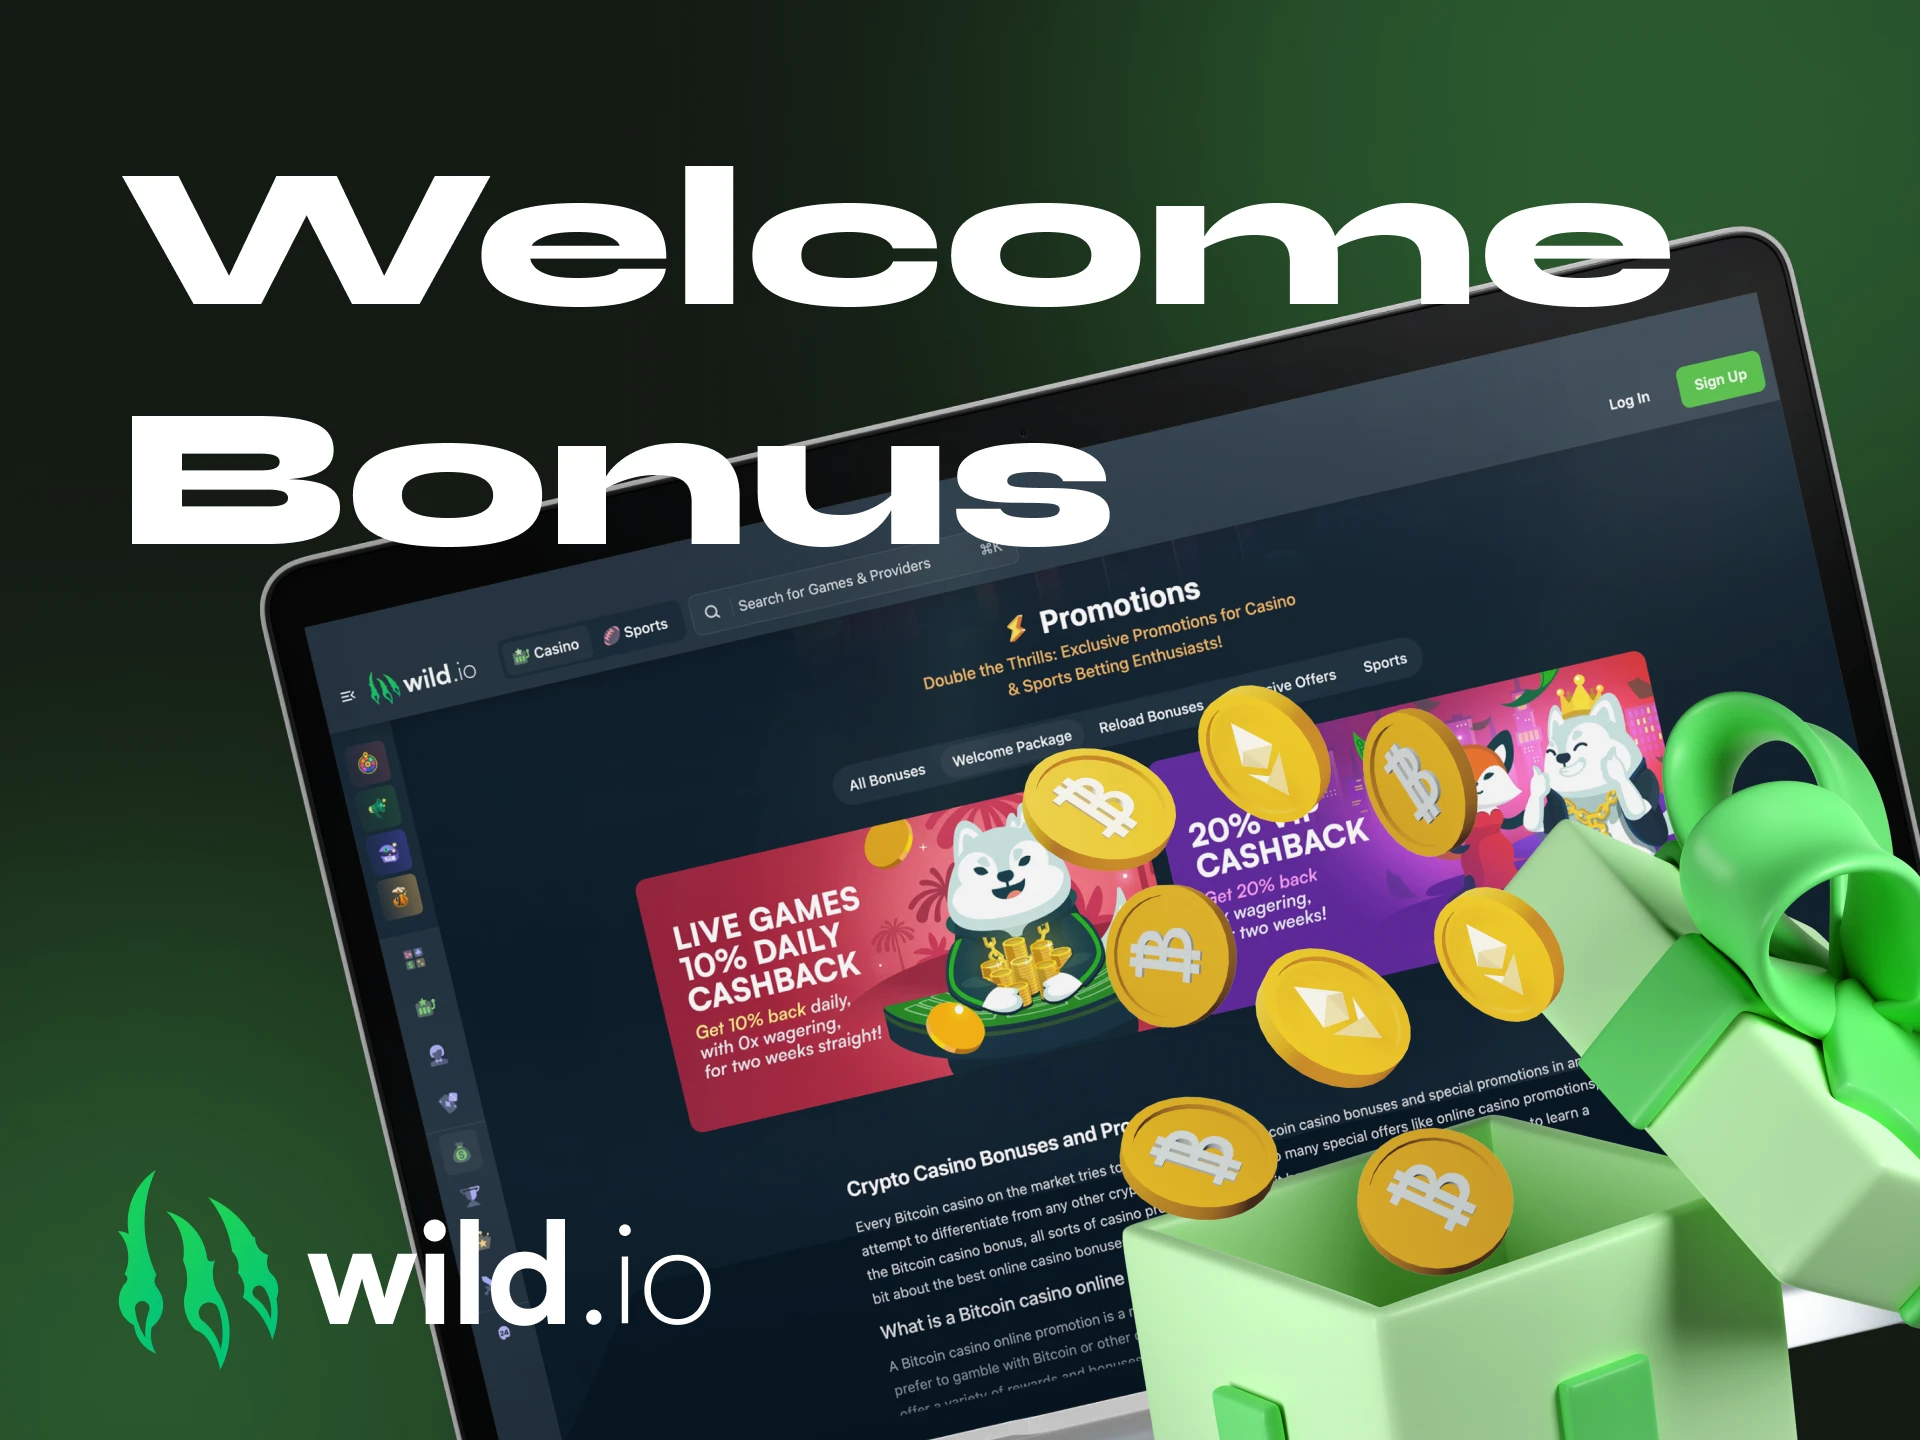 What welcome bonus can players receive at the Wildio online casino.